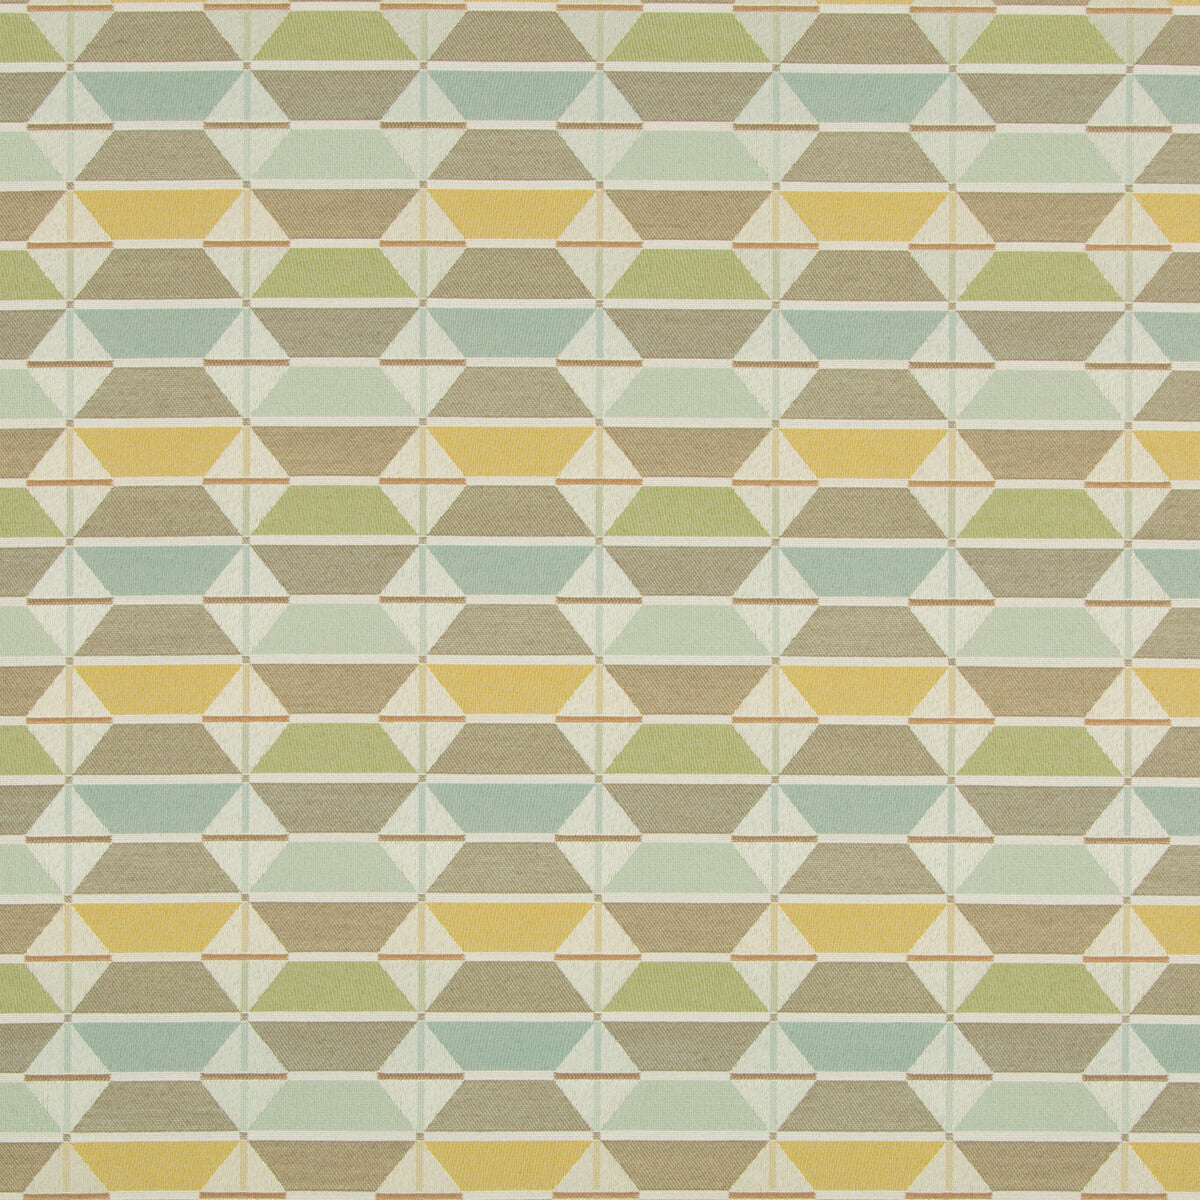 Format fabric in skylight color - pattern 35094.1623.0 - by Kravet Contract in the Gis Crypton collection